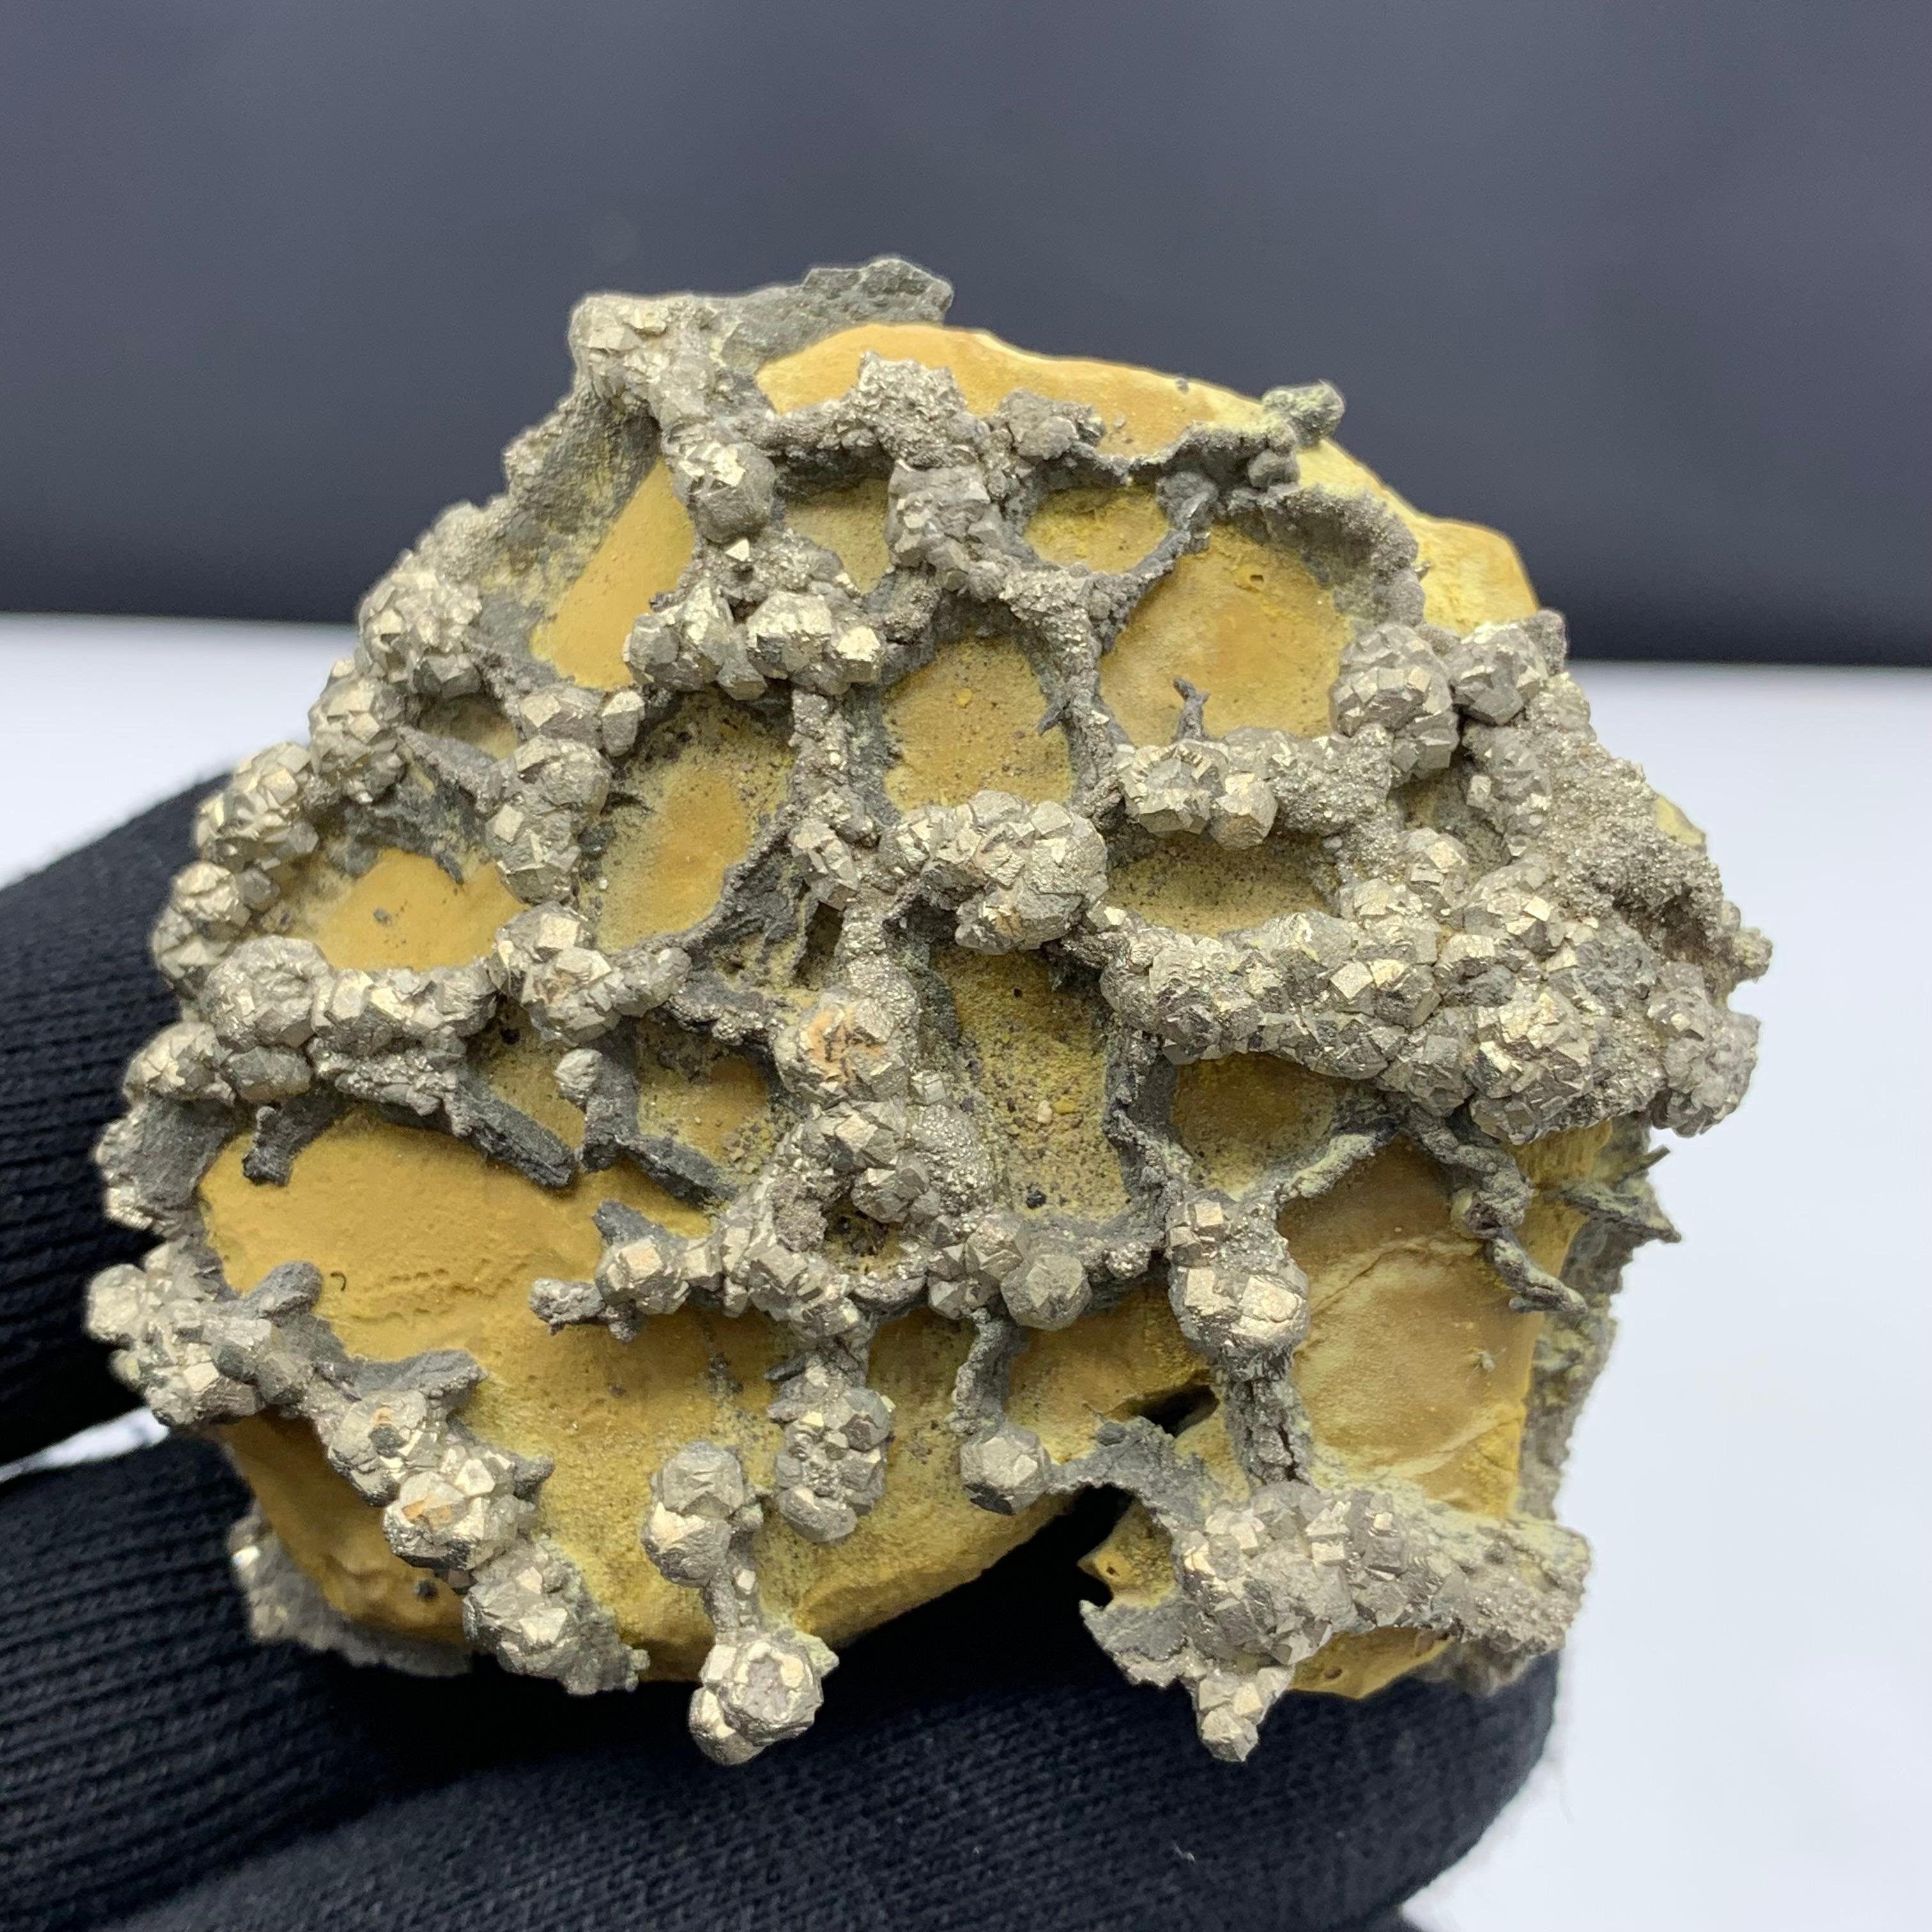 218.47 Gram Attractive  Pyrite Specimen From Pakistan

Weight: 218.47 Gram
Dimension: 6.7 x 6.4 x 3.9 Cm
Origin: Pakistan

Pyrite is found in a wide variety of geological settings, from igneous, sedimentary and metamorphic rock to hydrothermal